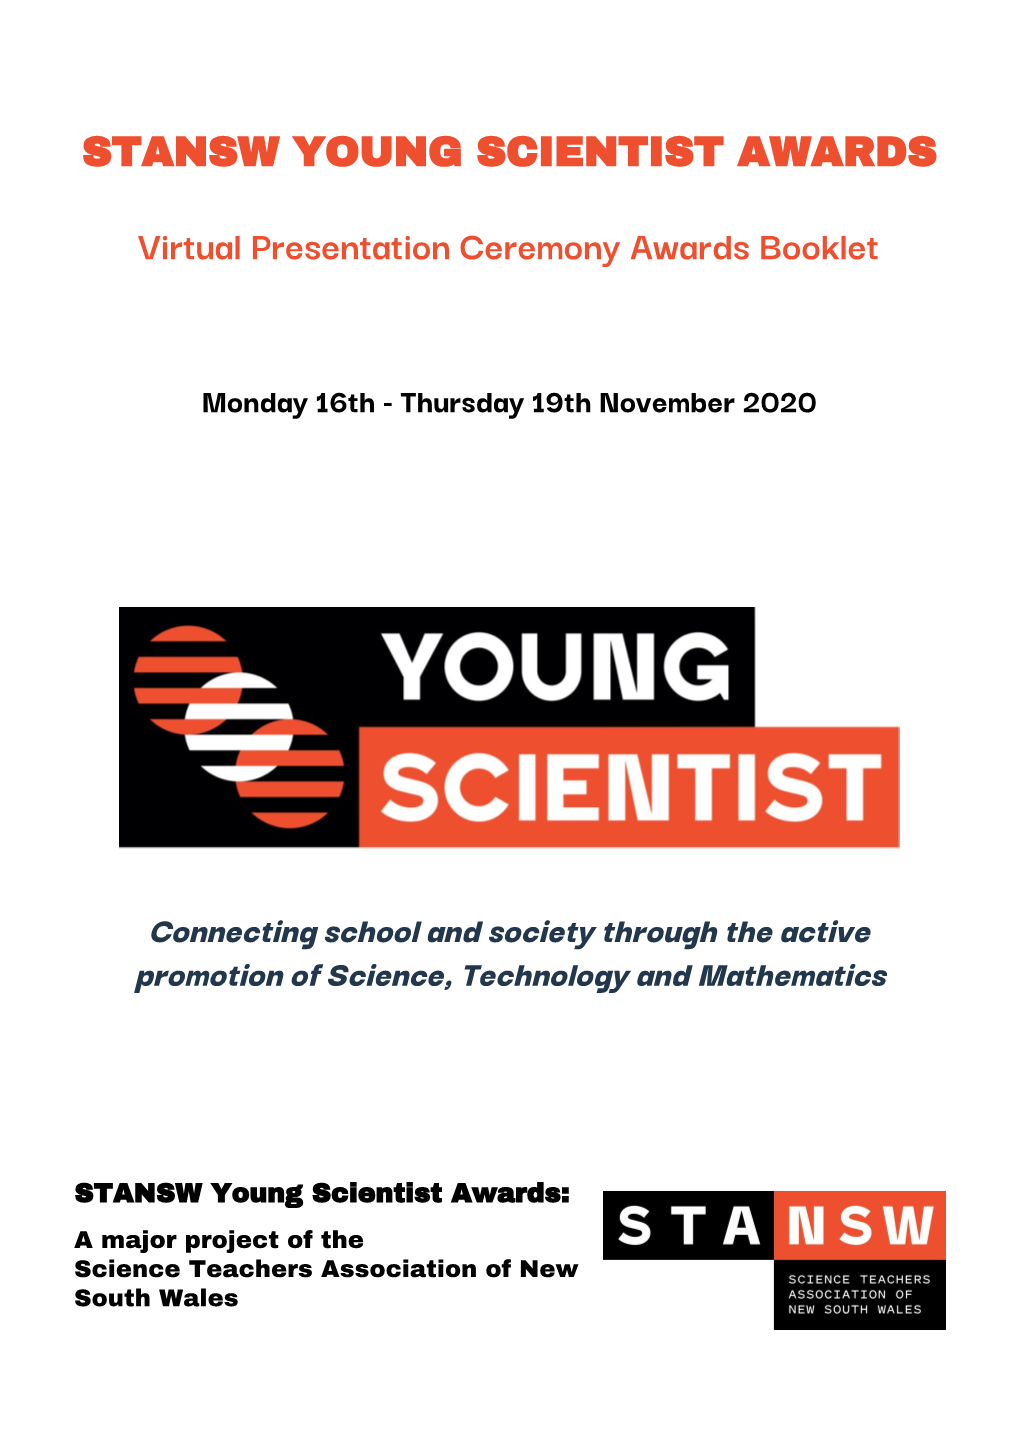 2020 STANSW Young Scientist Awards Presentation Ceremony